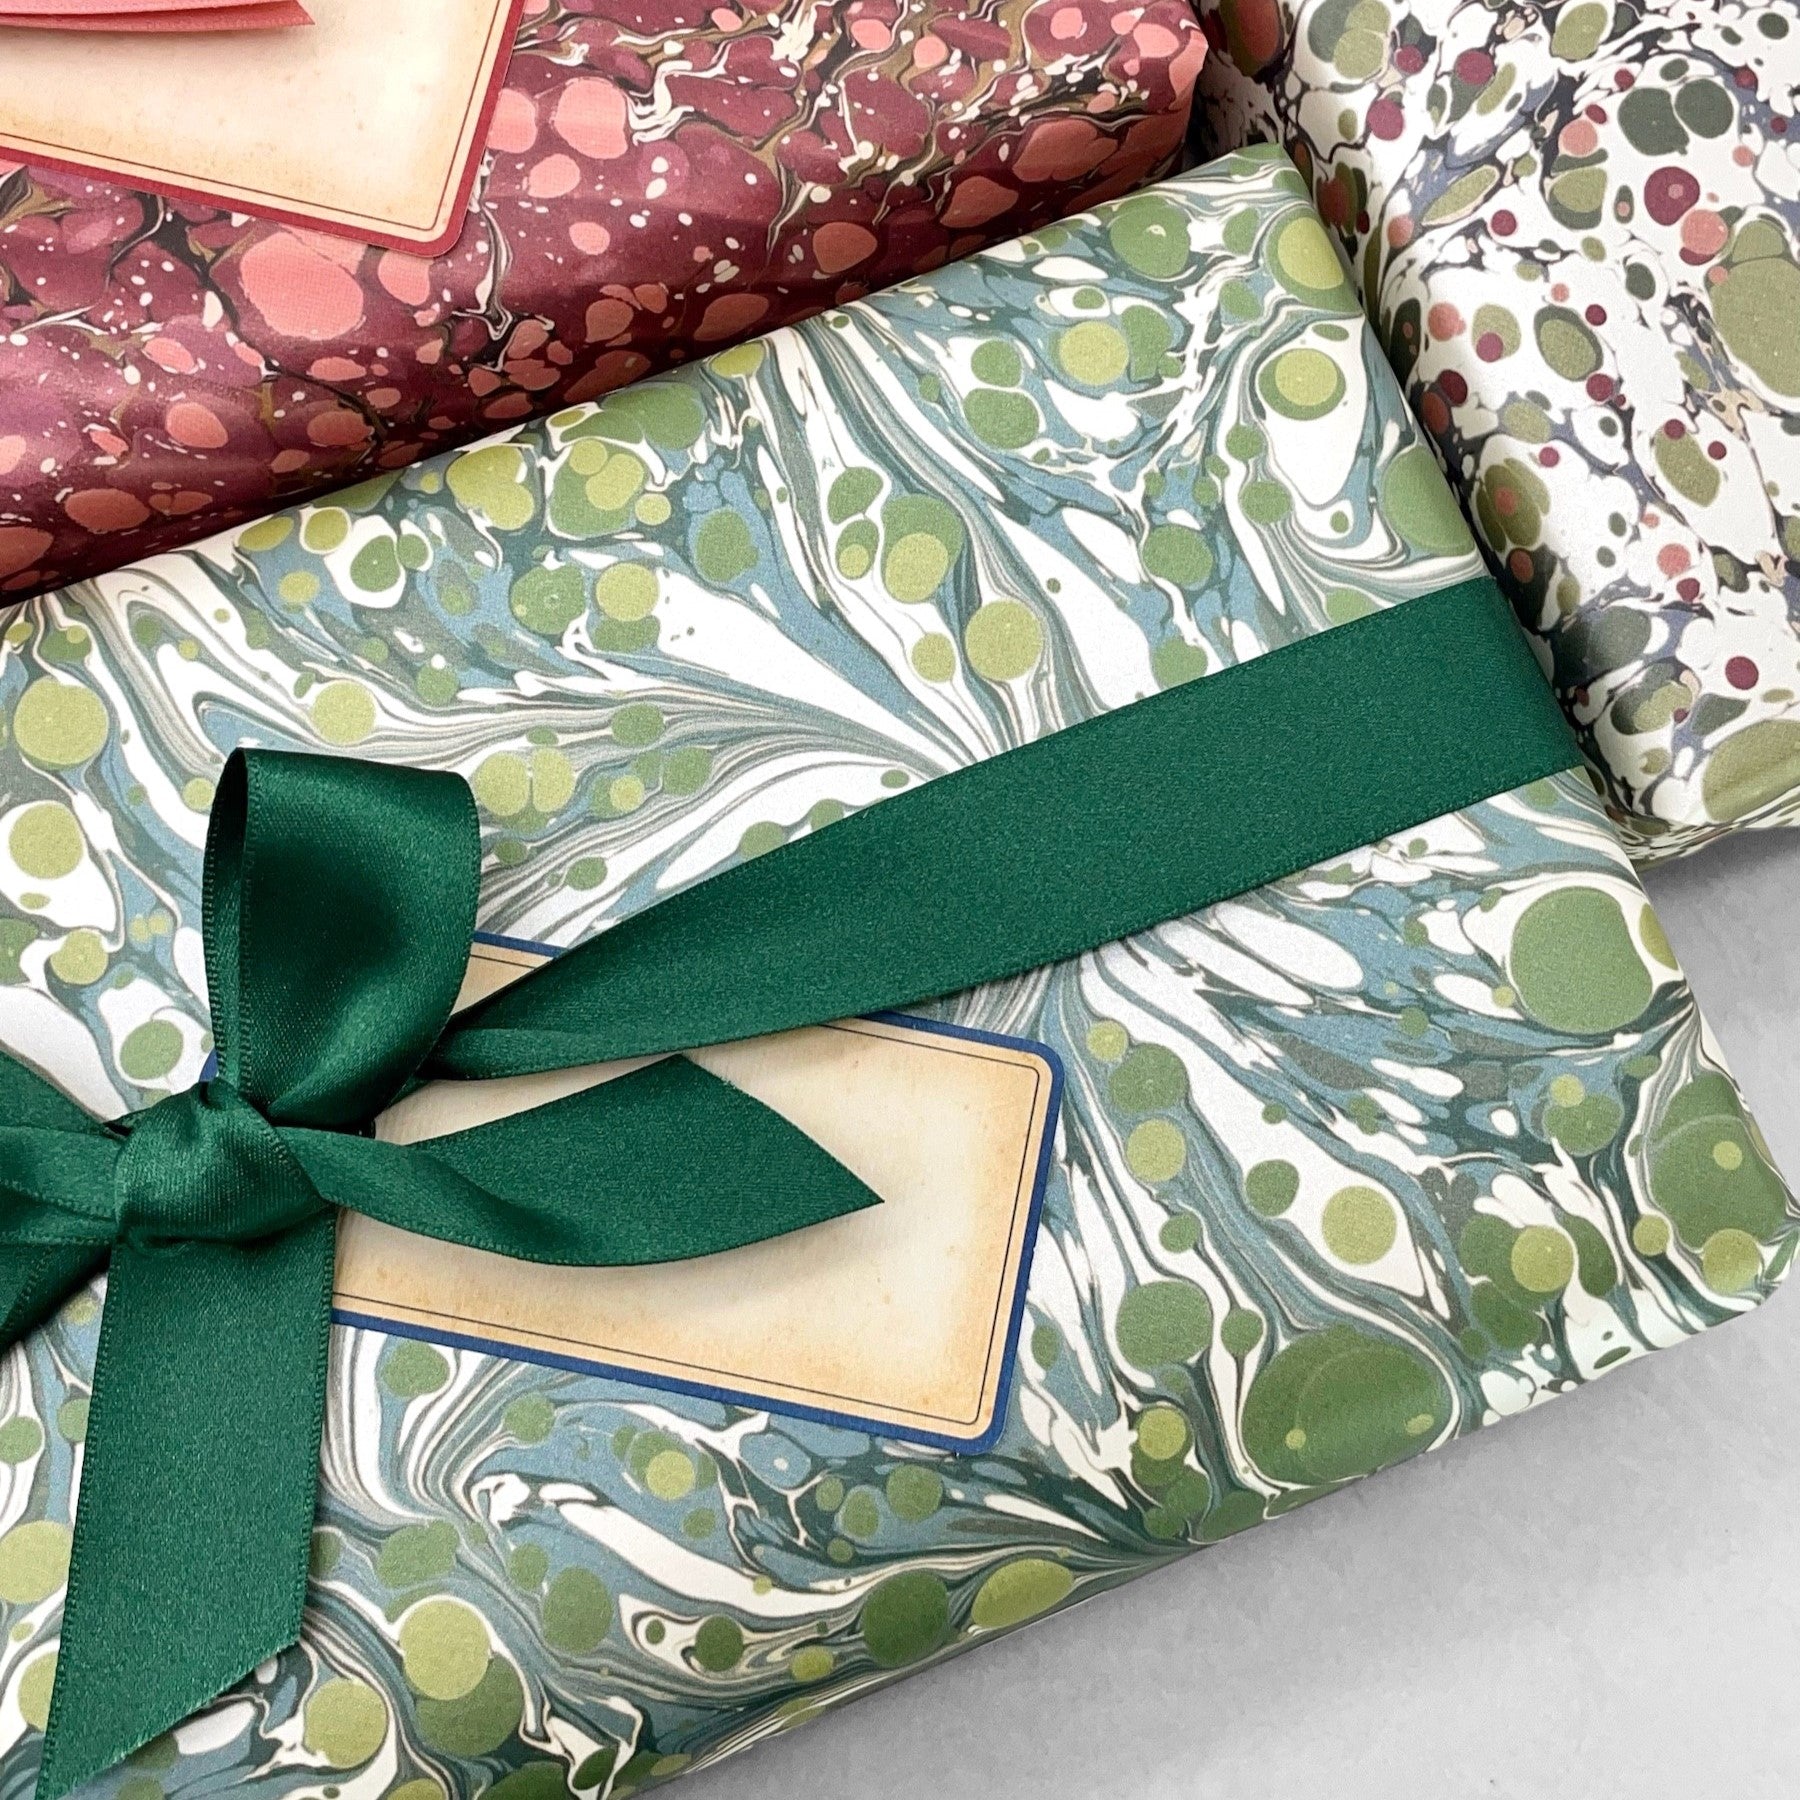 Printed marbled wrapping paper by Jemma Lewis Marbling. Marbled paper with a shimmery base paper and marbled pattern in green, lime and white. Pictured with other marbled presents